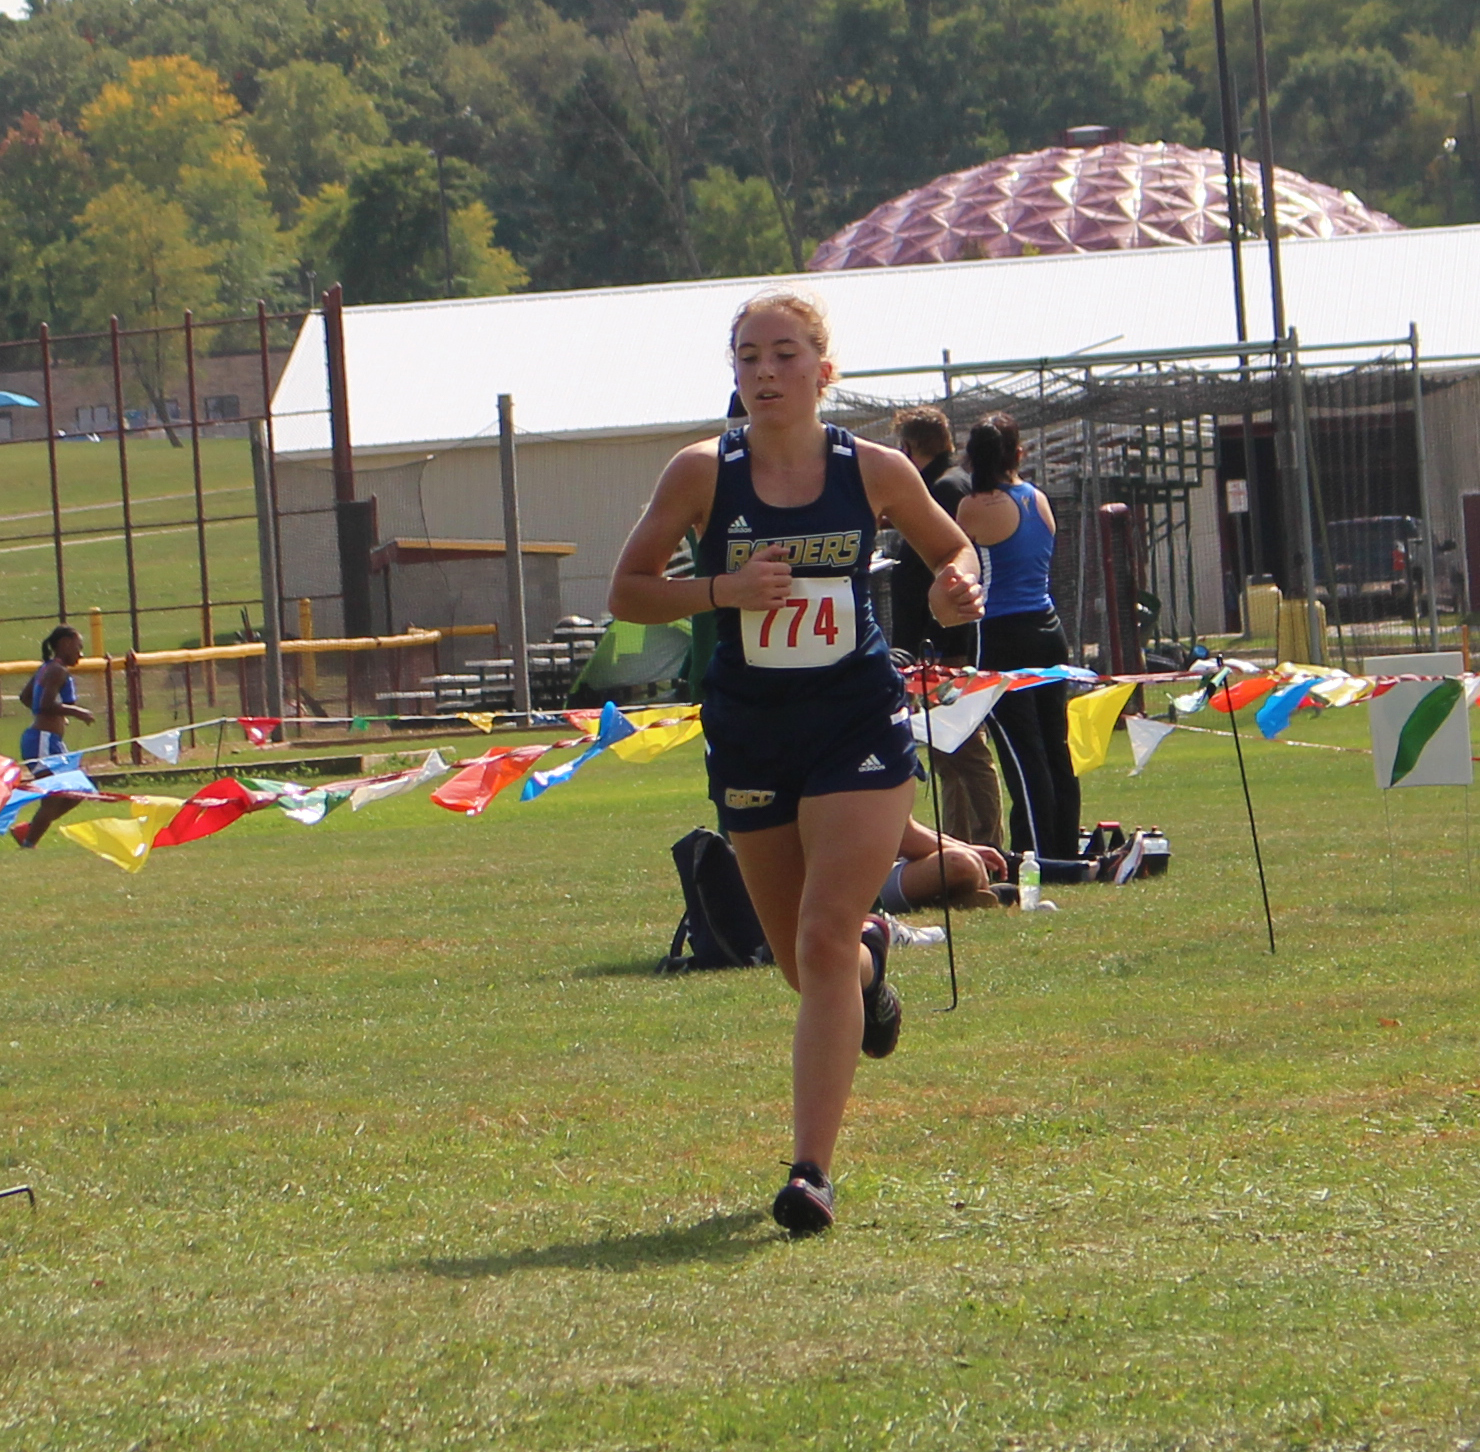 Audrey Meyering of Grand Rapids runs at the Jackson College Jets Classic